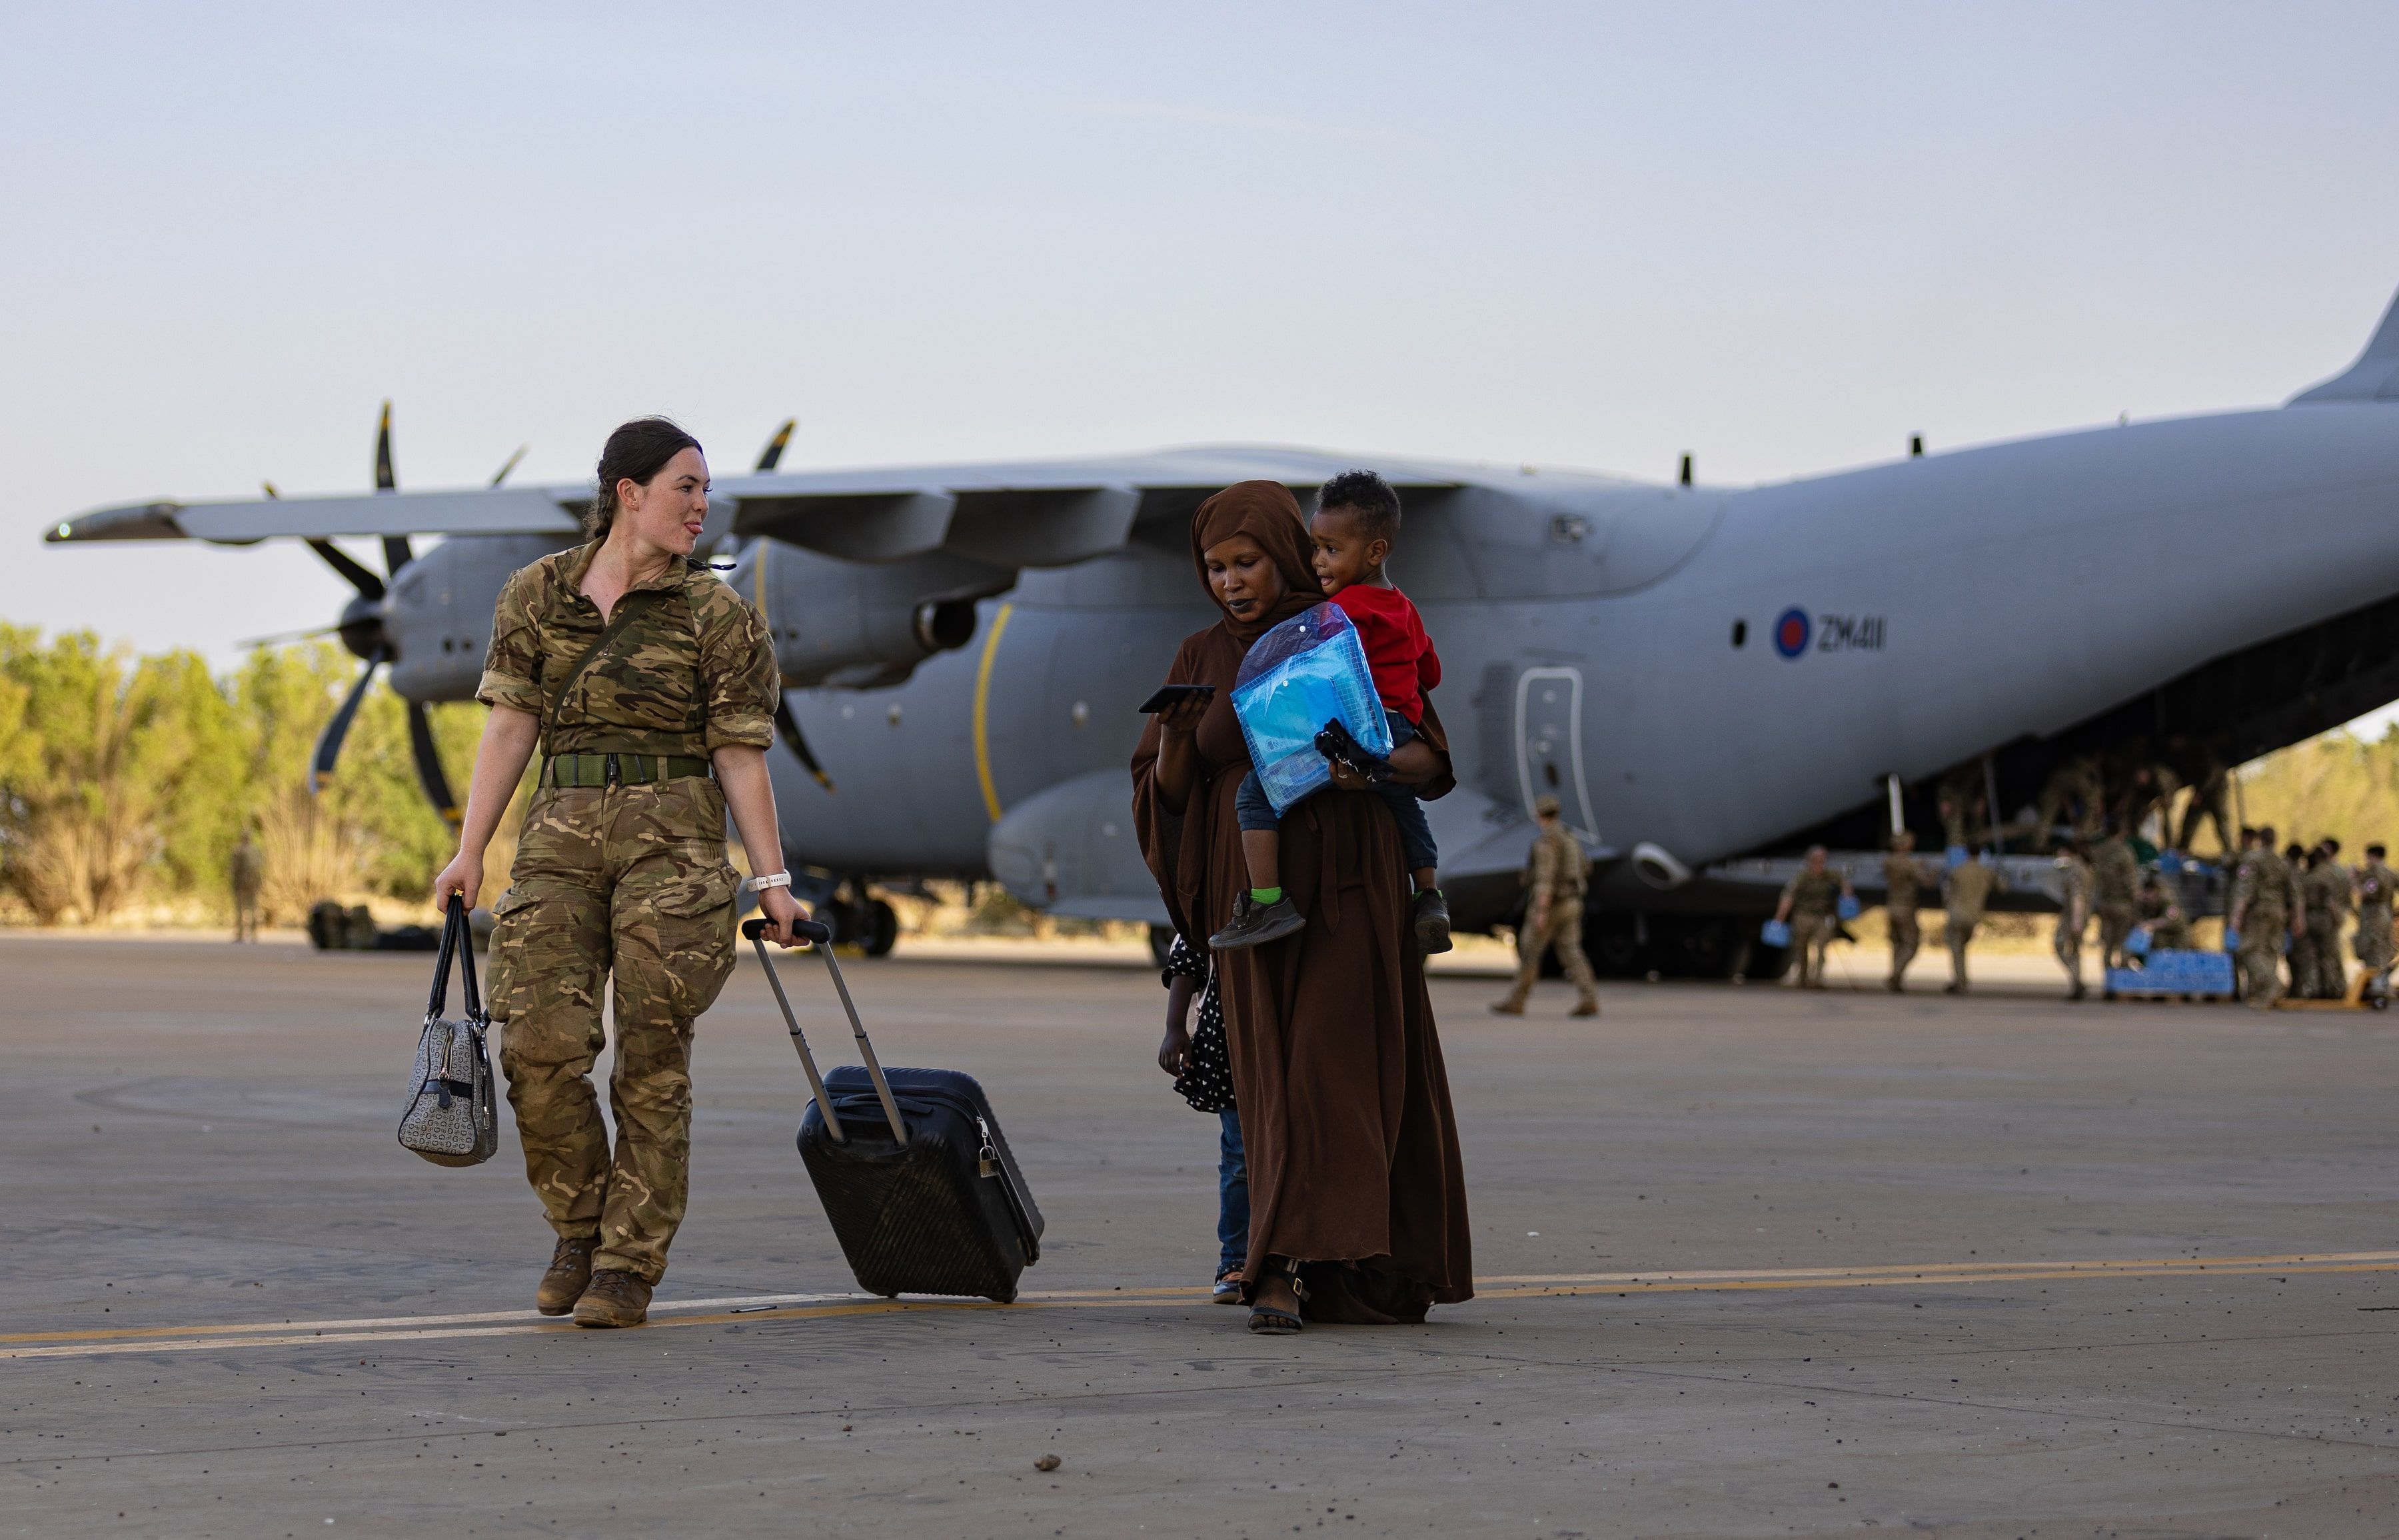 RAF personnel assisting refugee off the plane, sticking out tongue with the little boy in mother's arms. 